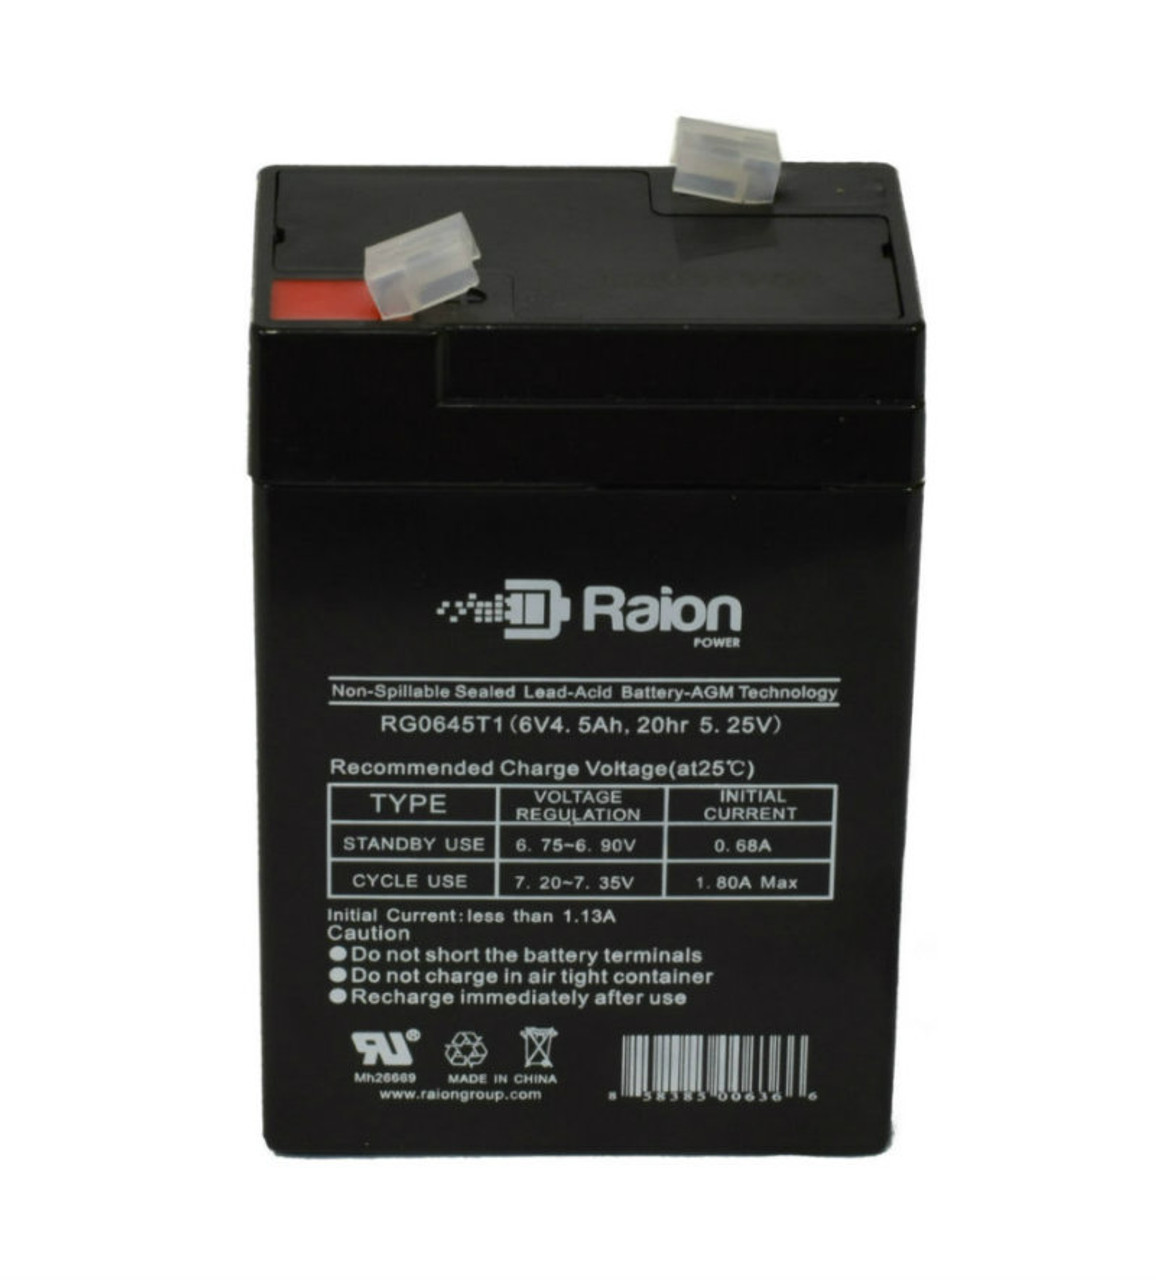 Raion Power RG0645T1 Replacement Battery Cartridge for Costzon 6V Licensed Mercedes Benz SLS Ride On Car